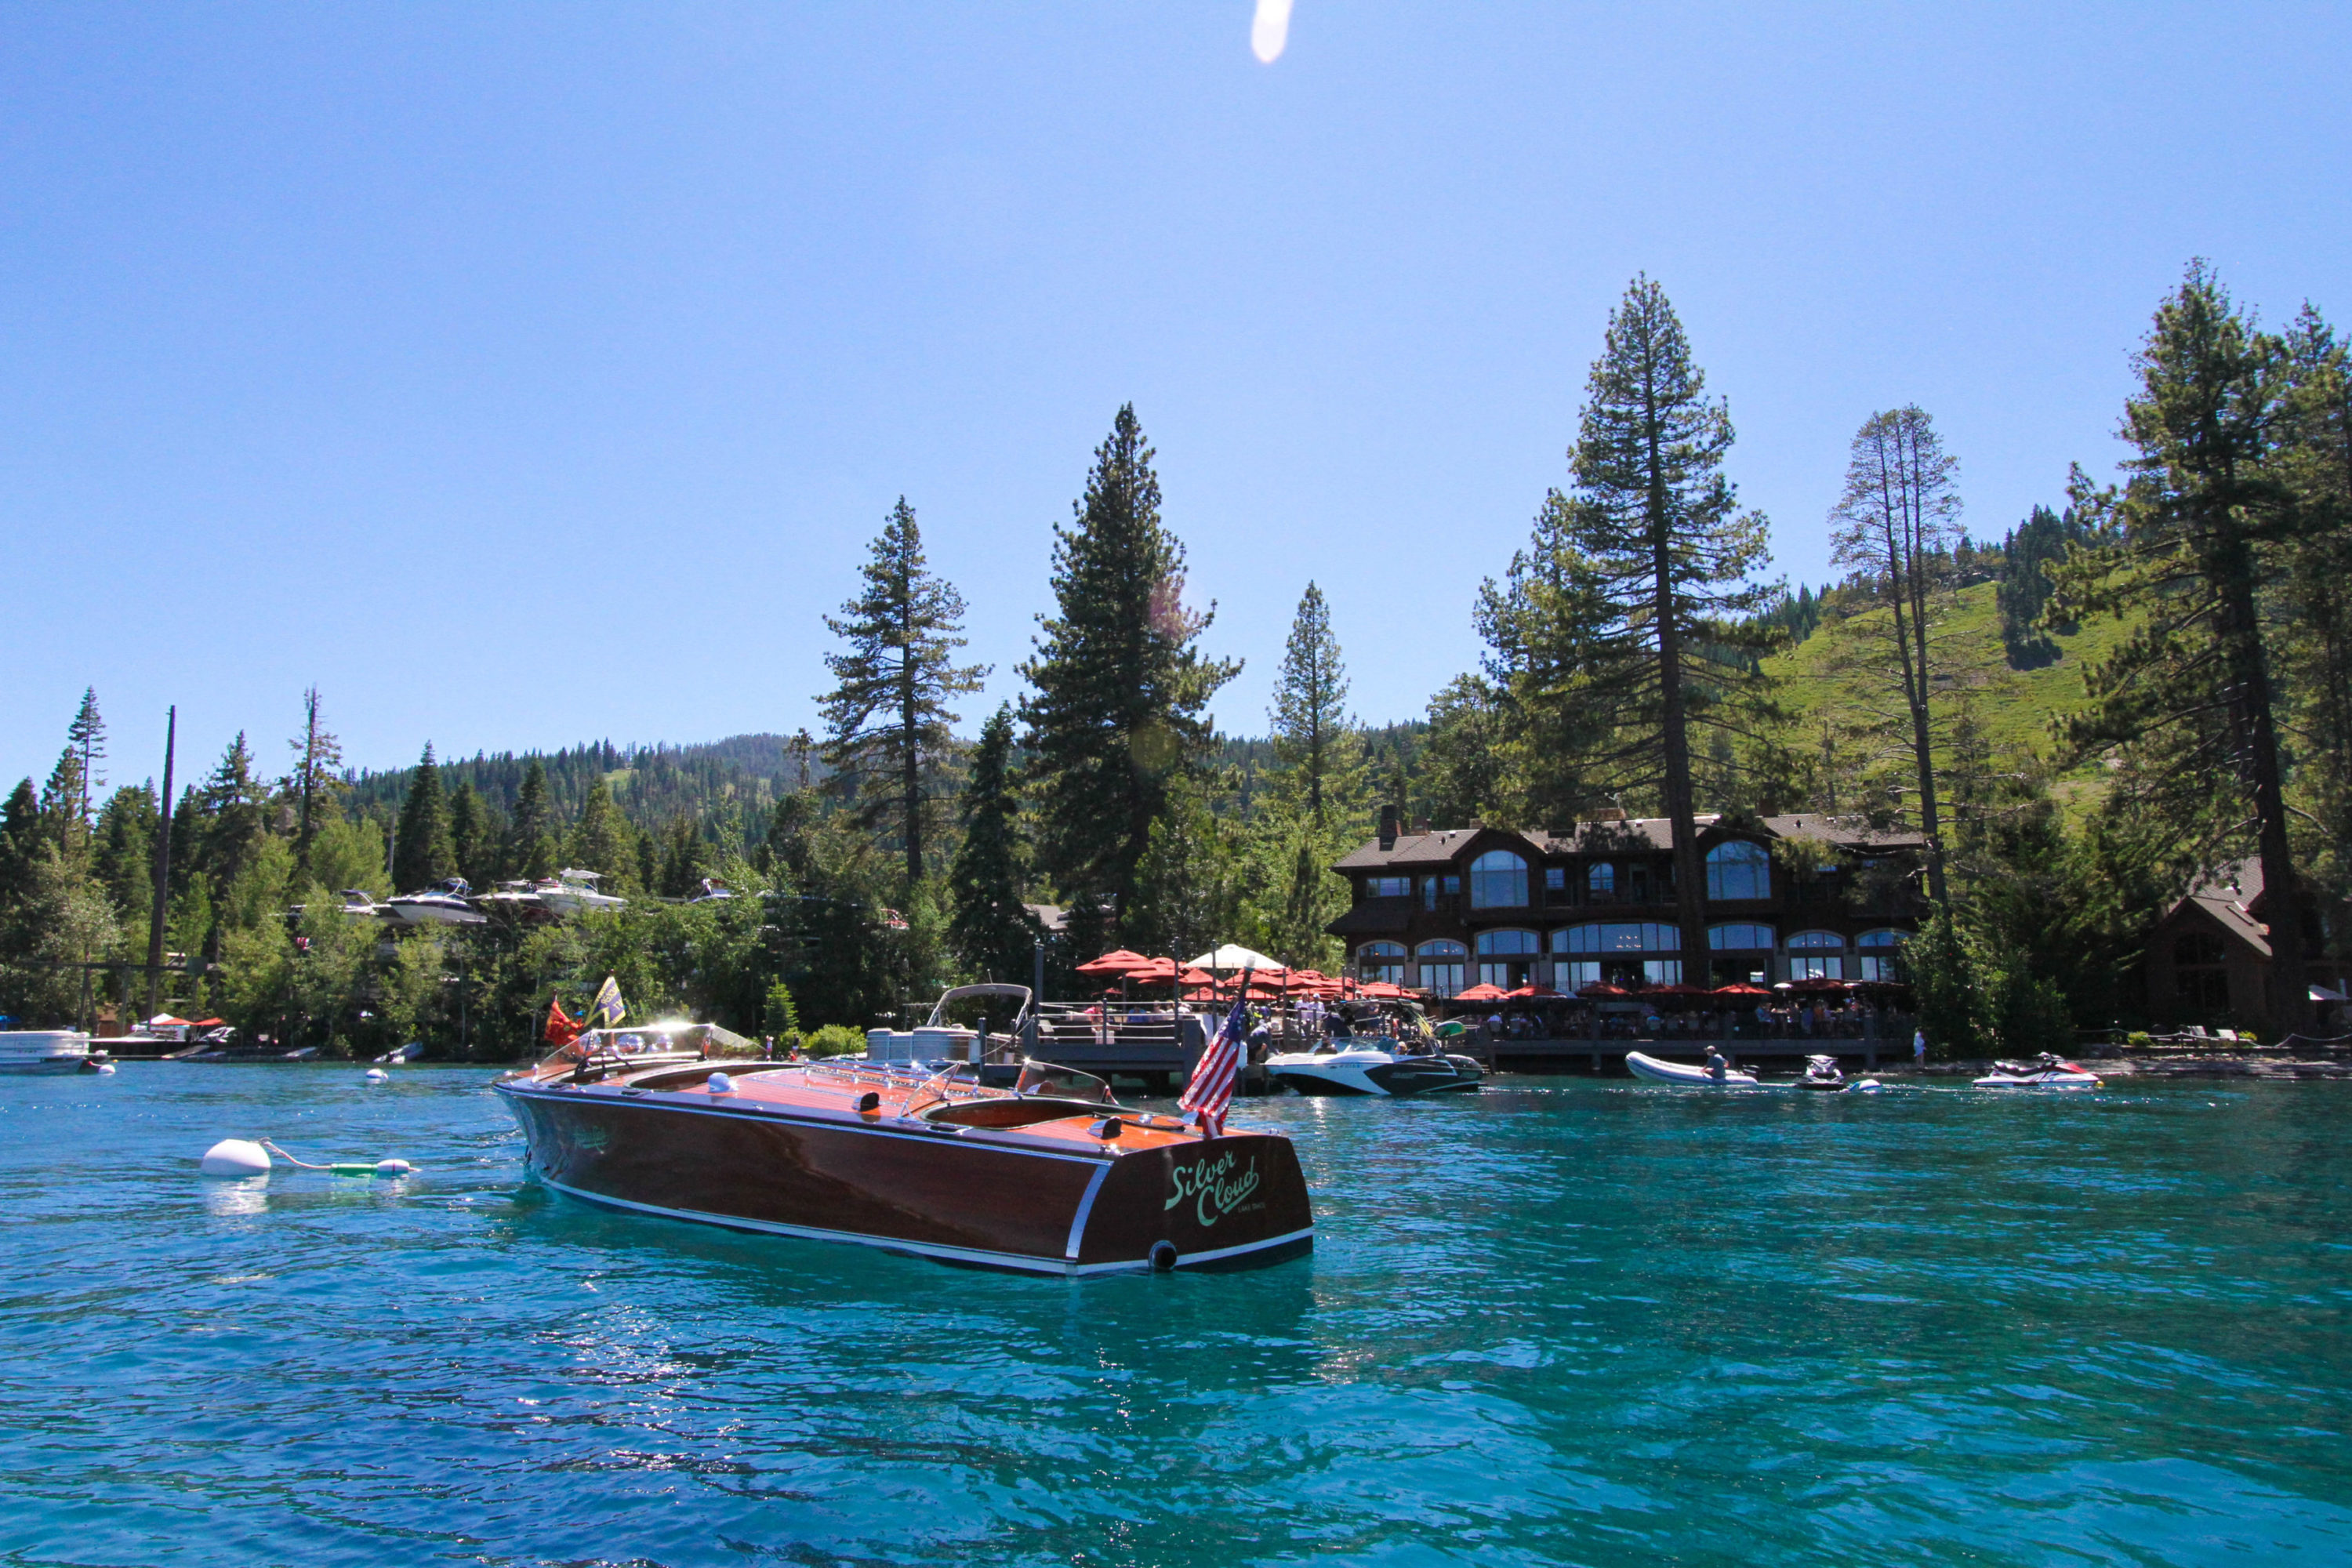 A wooden boat with the name "Silver Cloud" floats in front of West Shore Cafe on Lake Tahoe